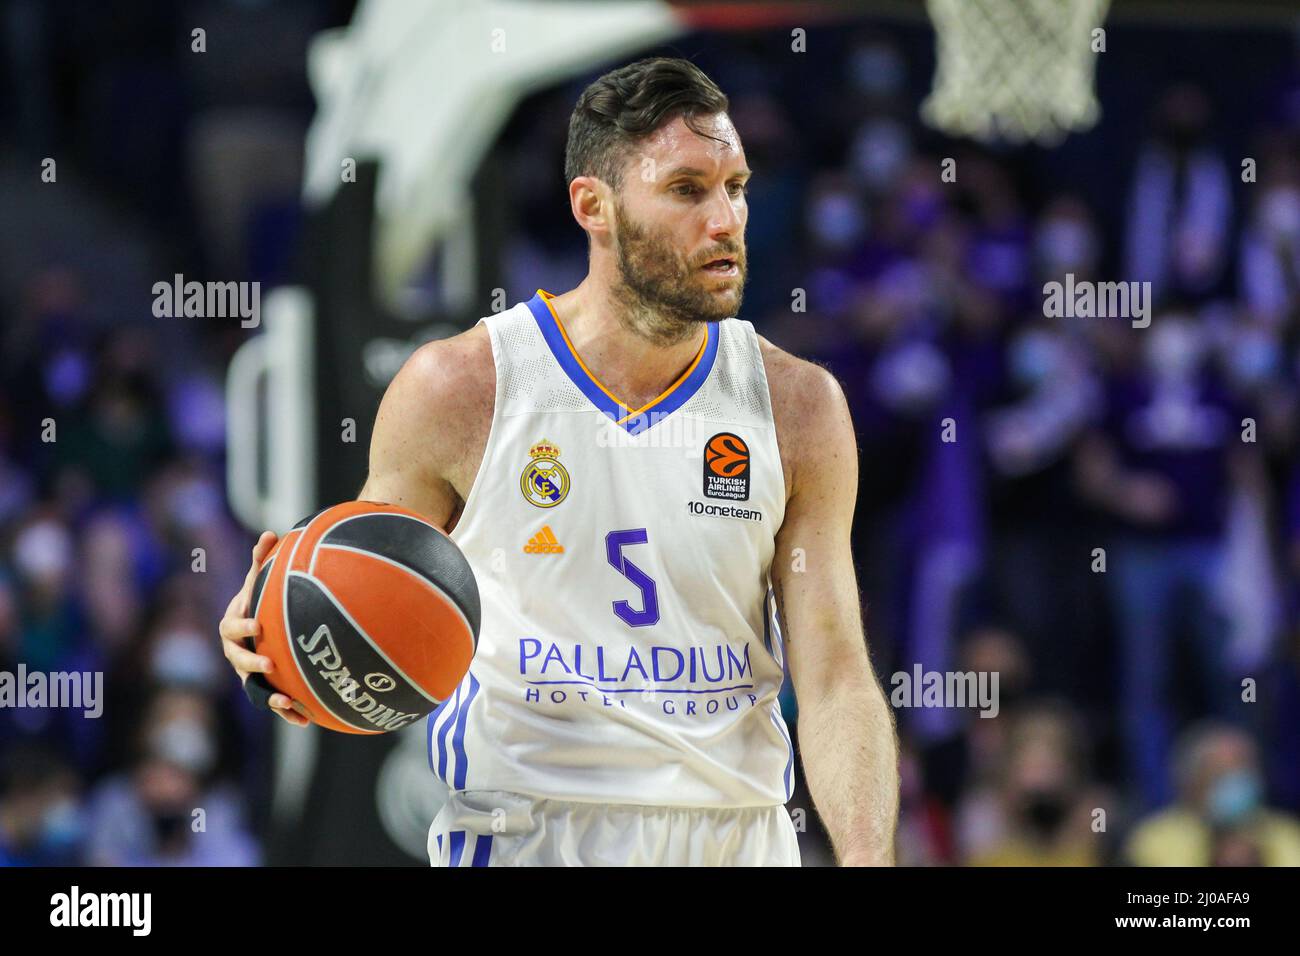 Madrid, Spain. 17th Mar, 2022. Rodolfo Fernandez Farres "Rudy" of Real Madrid during the Turkish Airlines Euroleague basketball match between Real Madrid and Asvel Lyon-Villeurbanne on march 17, 2022 at Wizink Center in Madrid, Spain Credit: Independent Photo Agency/Alamy Live Newss Stock Photo